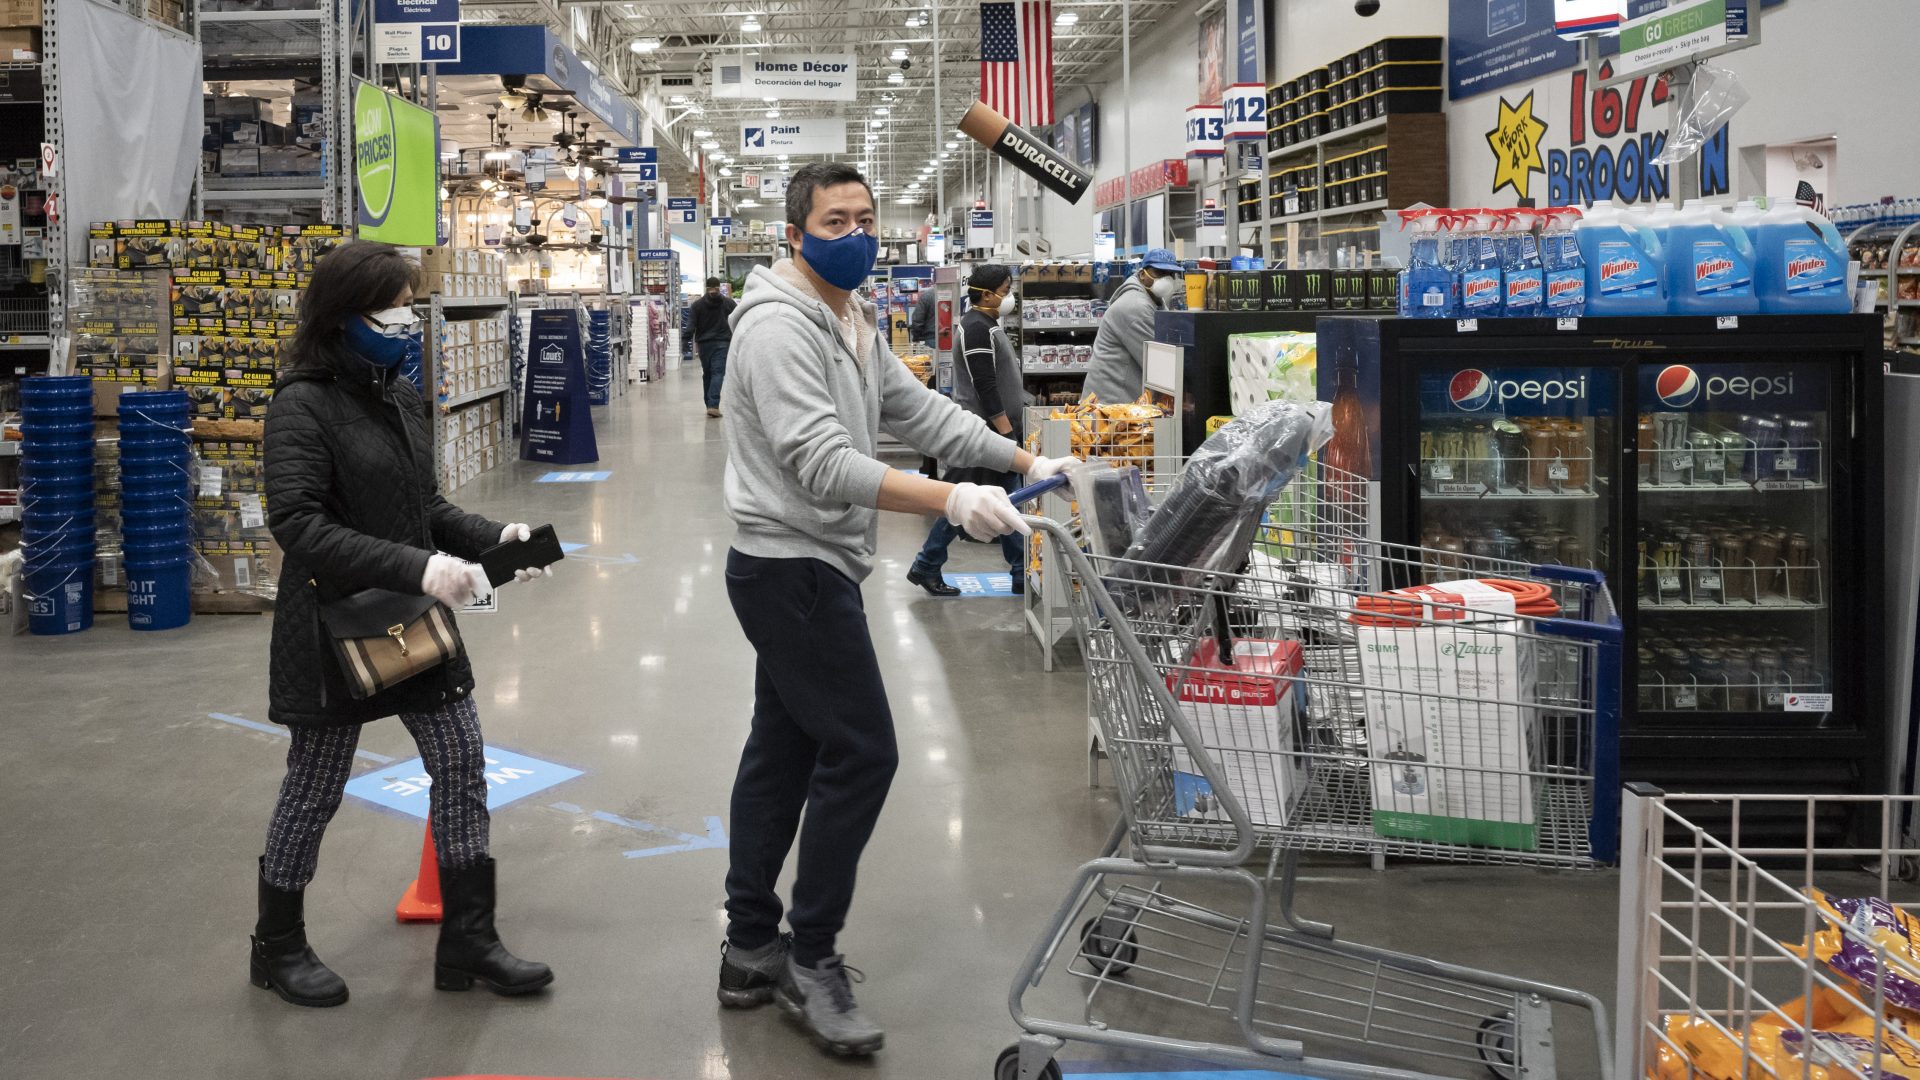 Retail sales plunged a record 8.7% last month as the coronavirus pandemic shut down economic activity around the country.